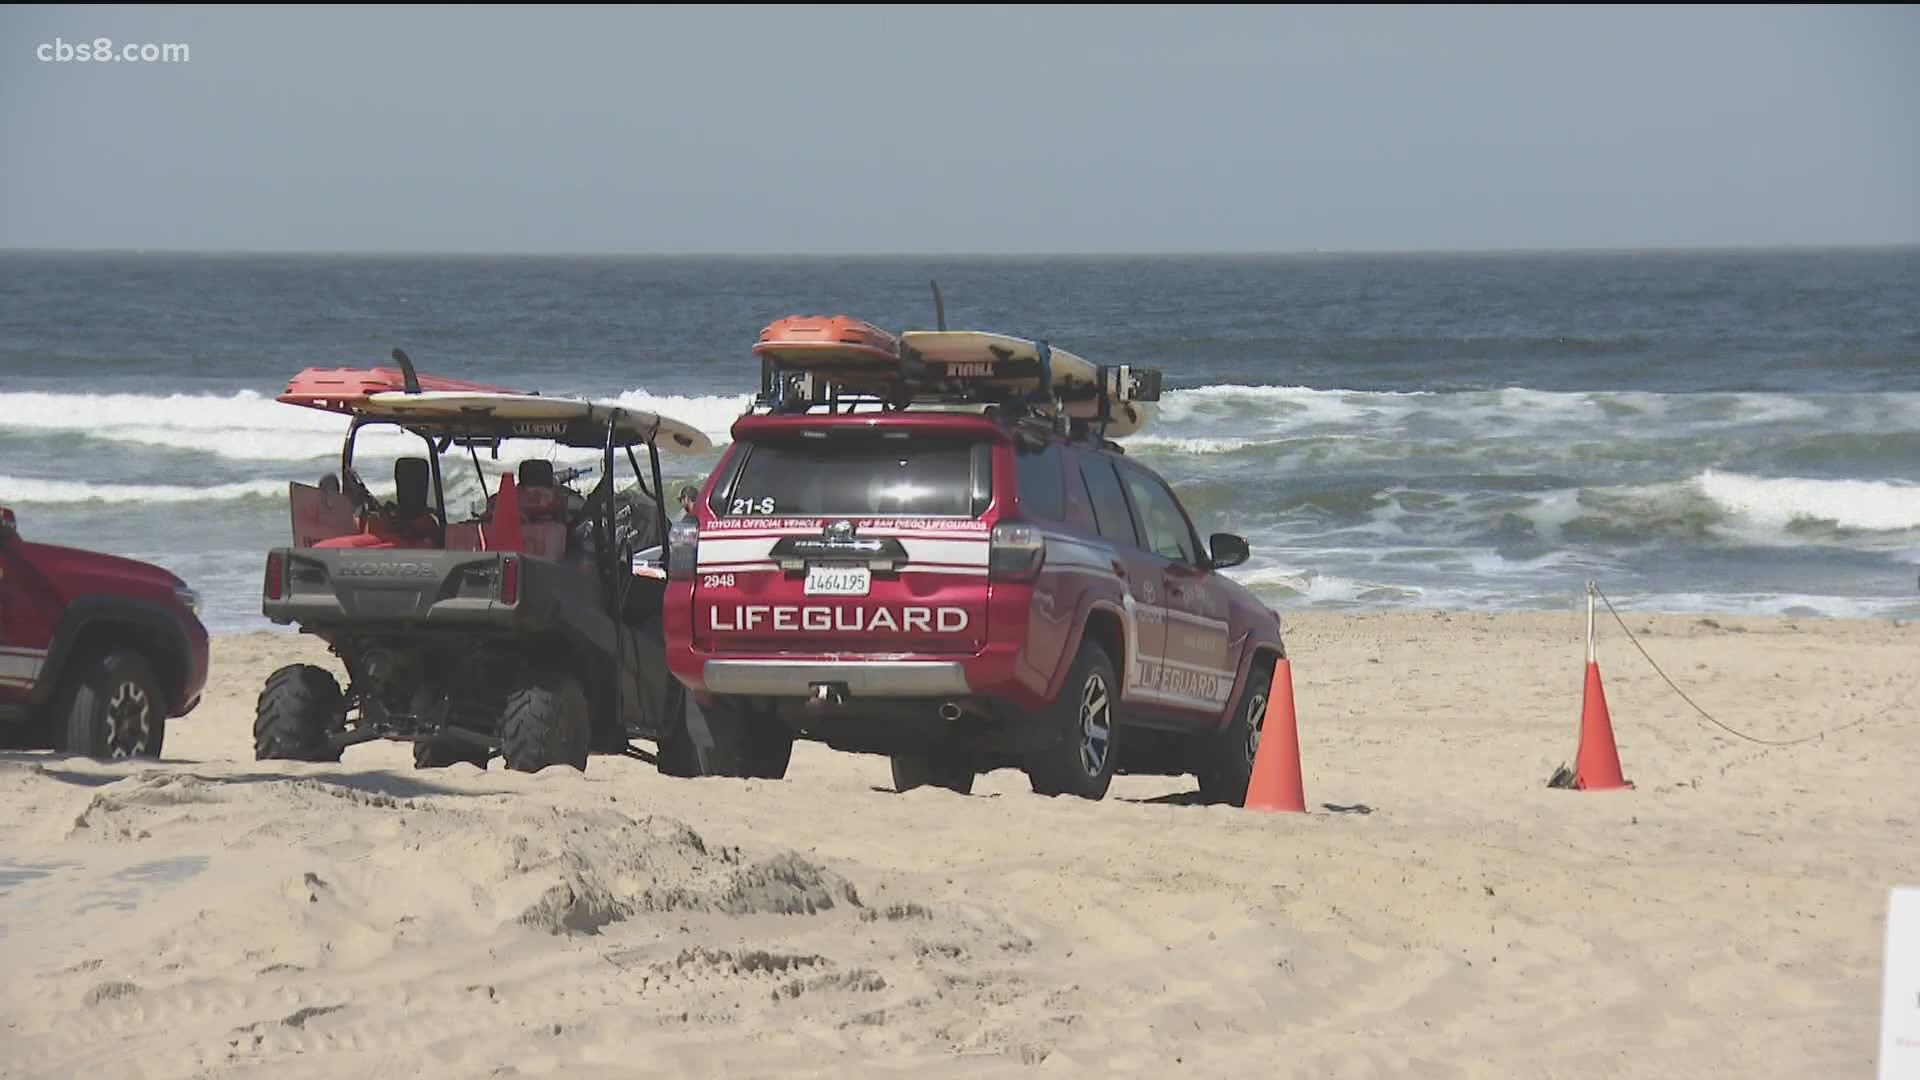 The City of San Diego Fire-Rescue Department Lifeguard Division said they are fully staffed and ready to manage visitors to city beaches.